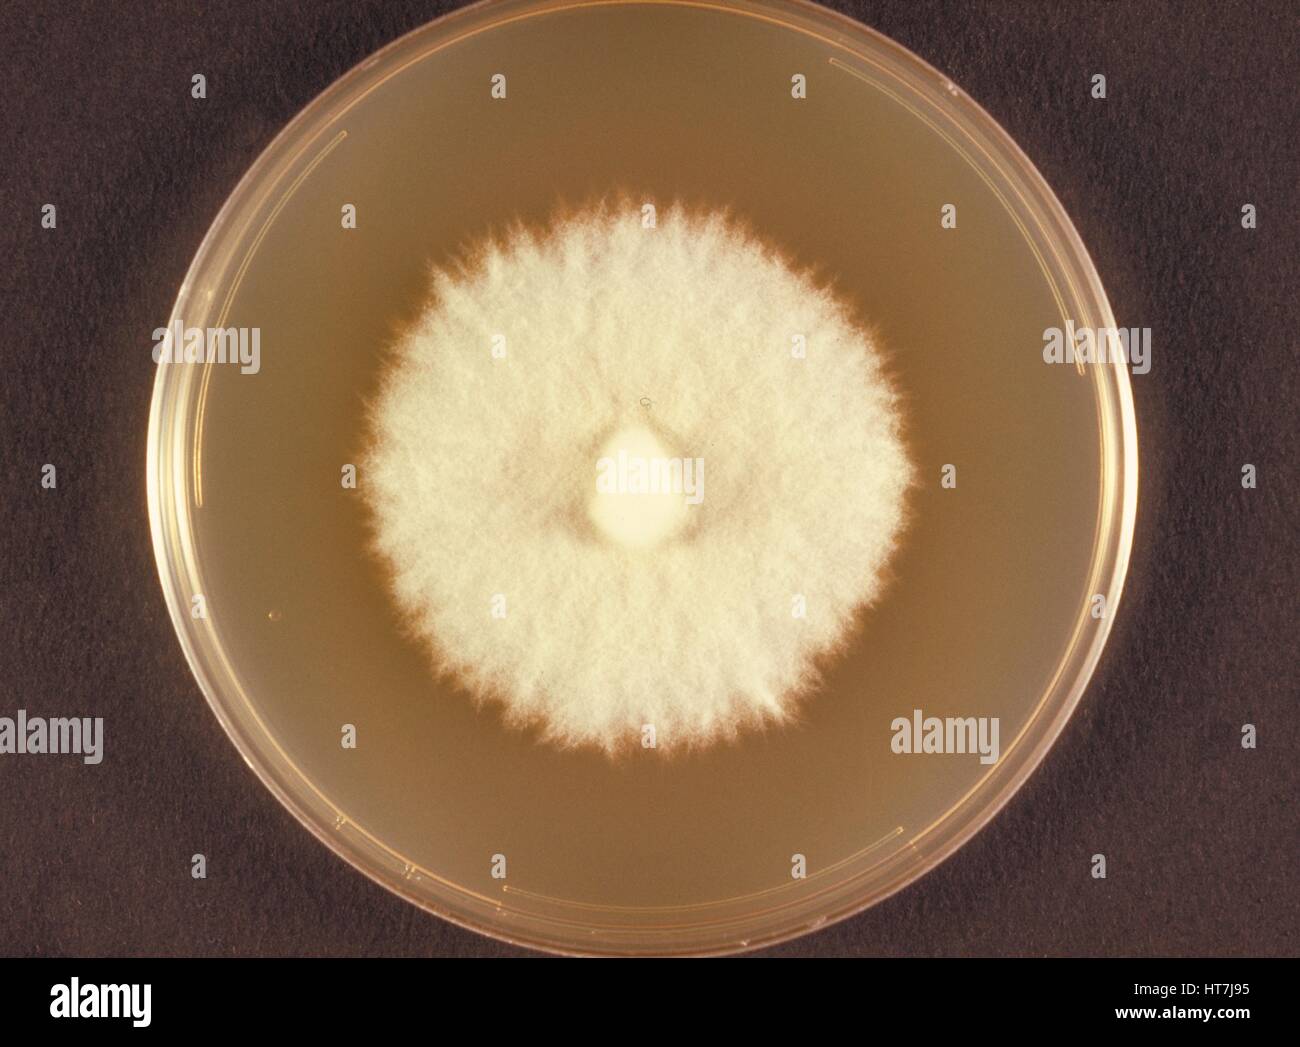 Top view of a Sabouraud dextrose agar plate culture growing the dermatophytic fungus Microsporum persicolor, 1973. Image courtesy CDC/Dr. Arvind A. Padhye. Stock Photo